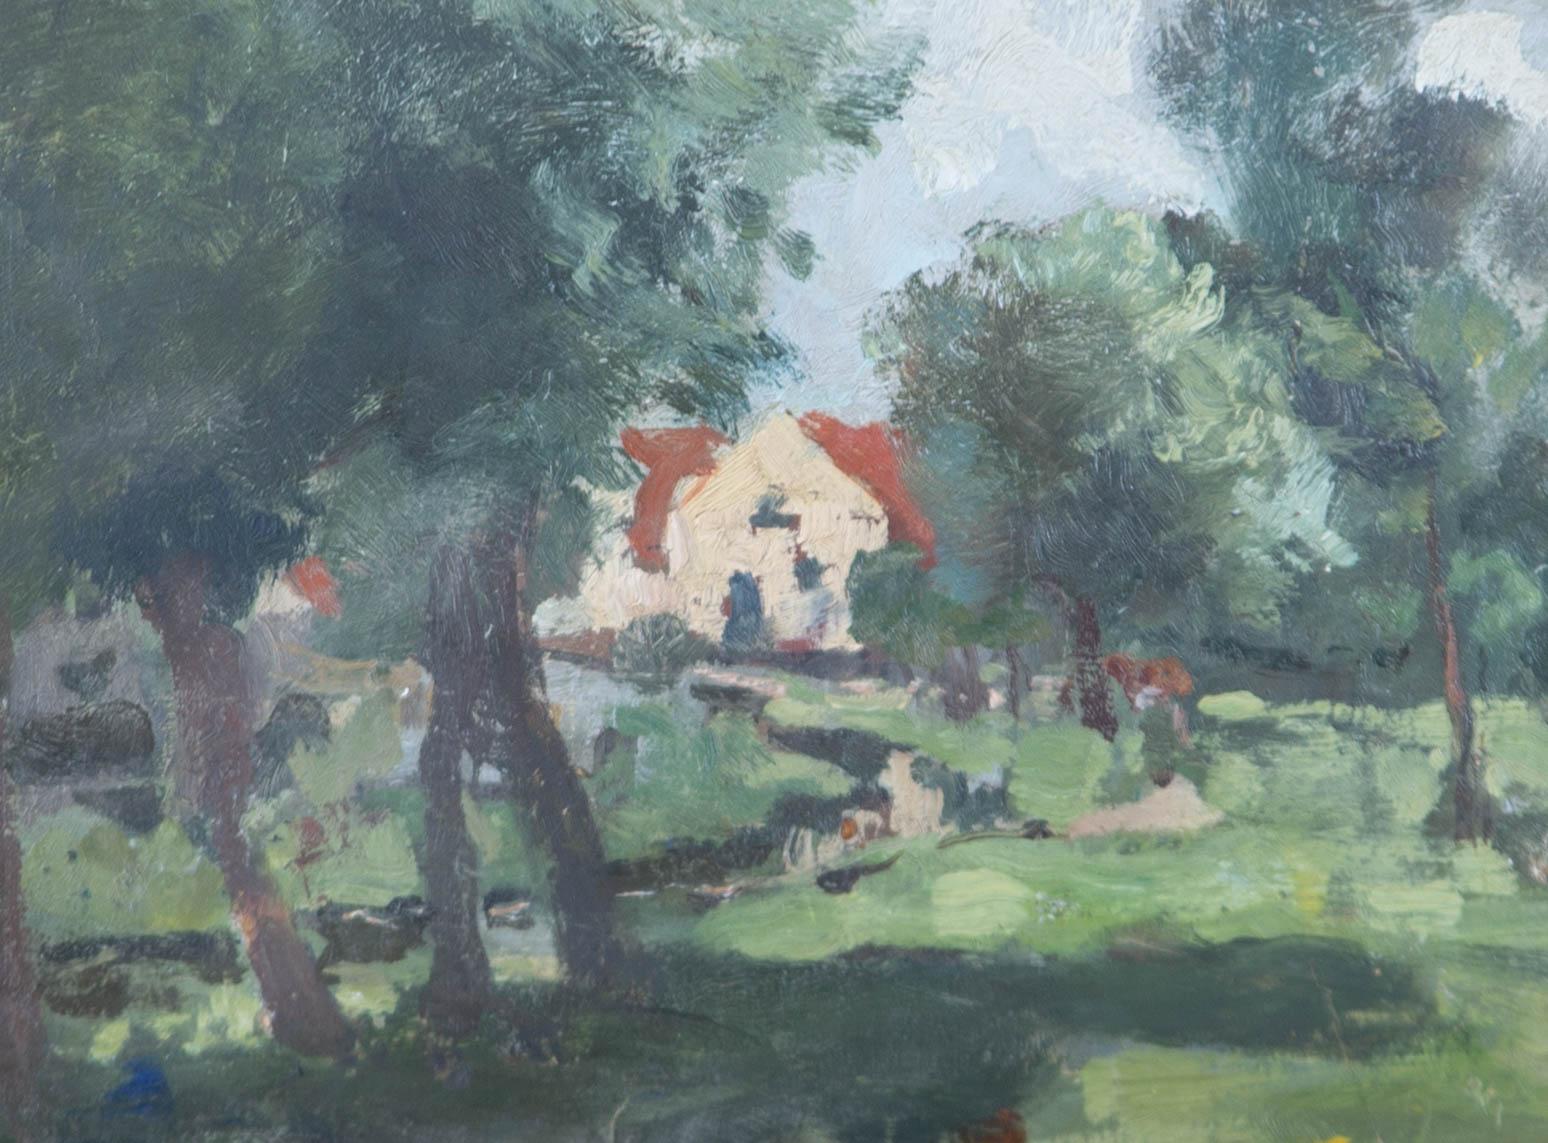 Impastoed oils render a quaint study of a countryside dwelling. The artwork is signed with the name 'J. P. Quinn' on the reverse of the board, but it is unclear if the artwork is his, as the original wove has been slightly cropped and laid to a